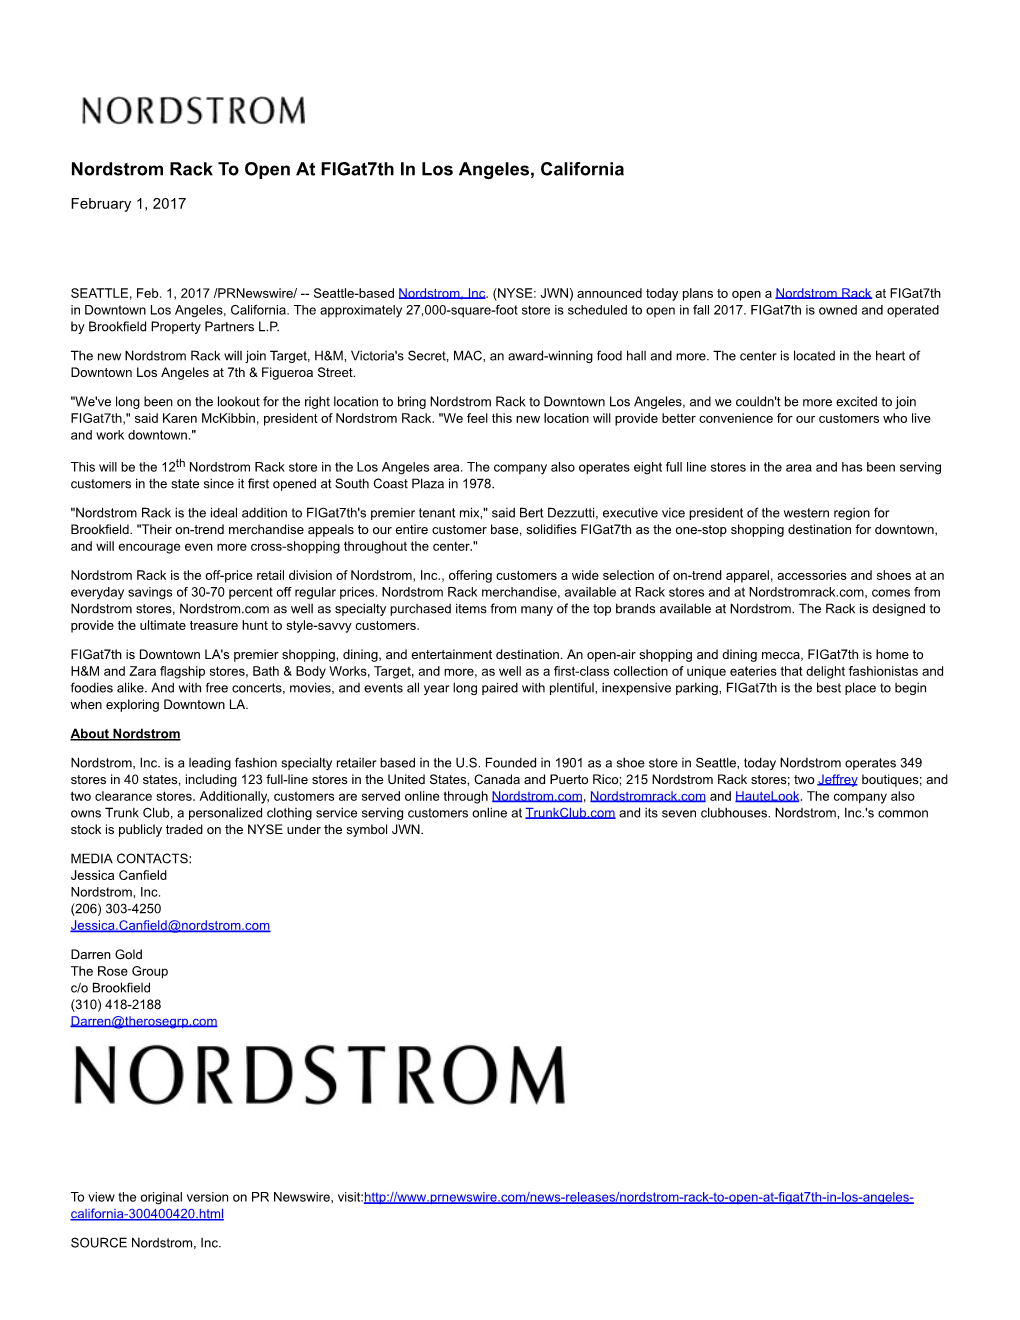 Nordstrom Rack to Open at Figat7th in Los Angeles, California